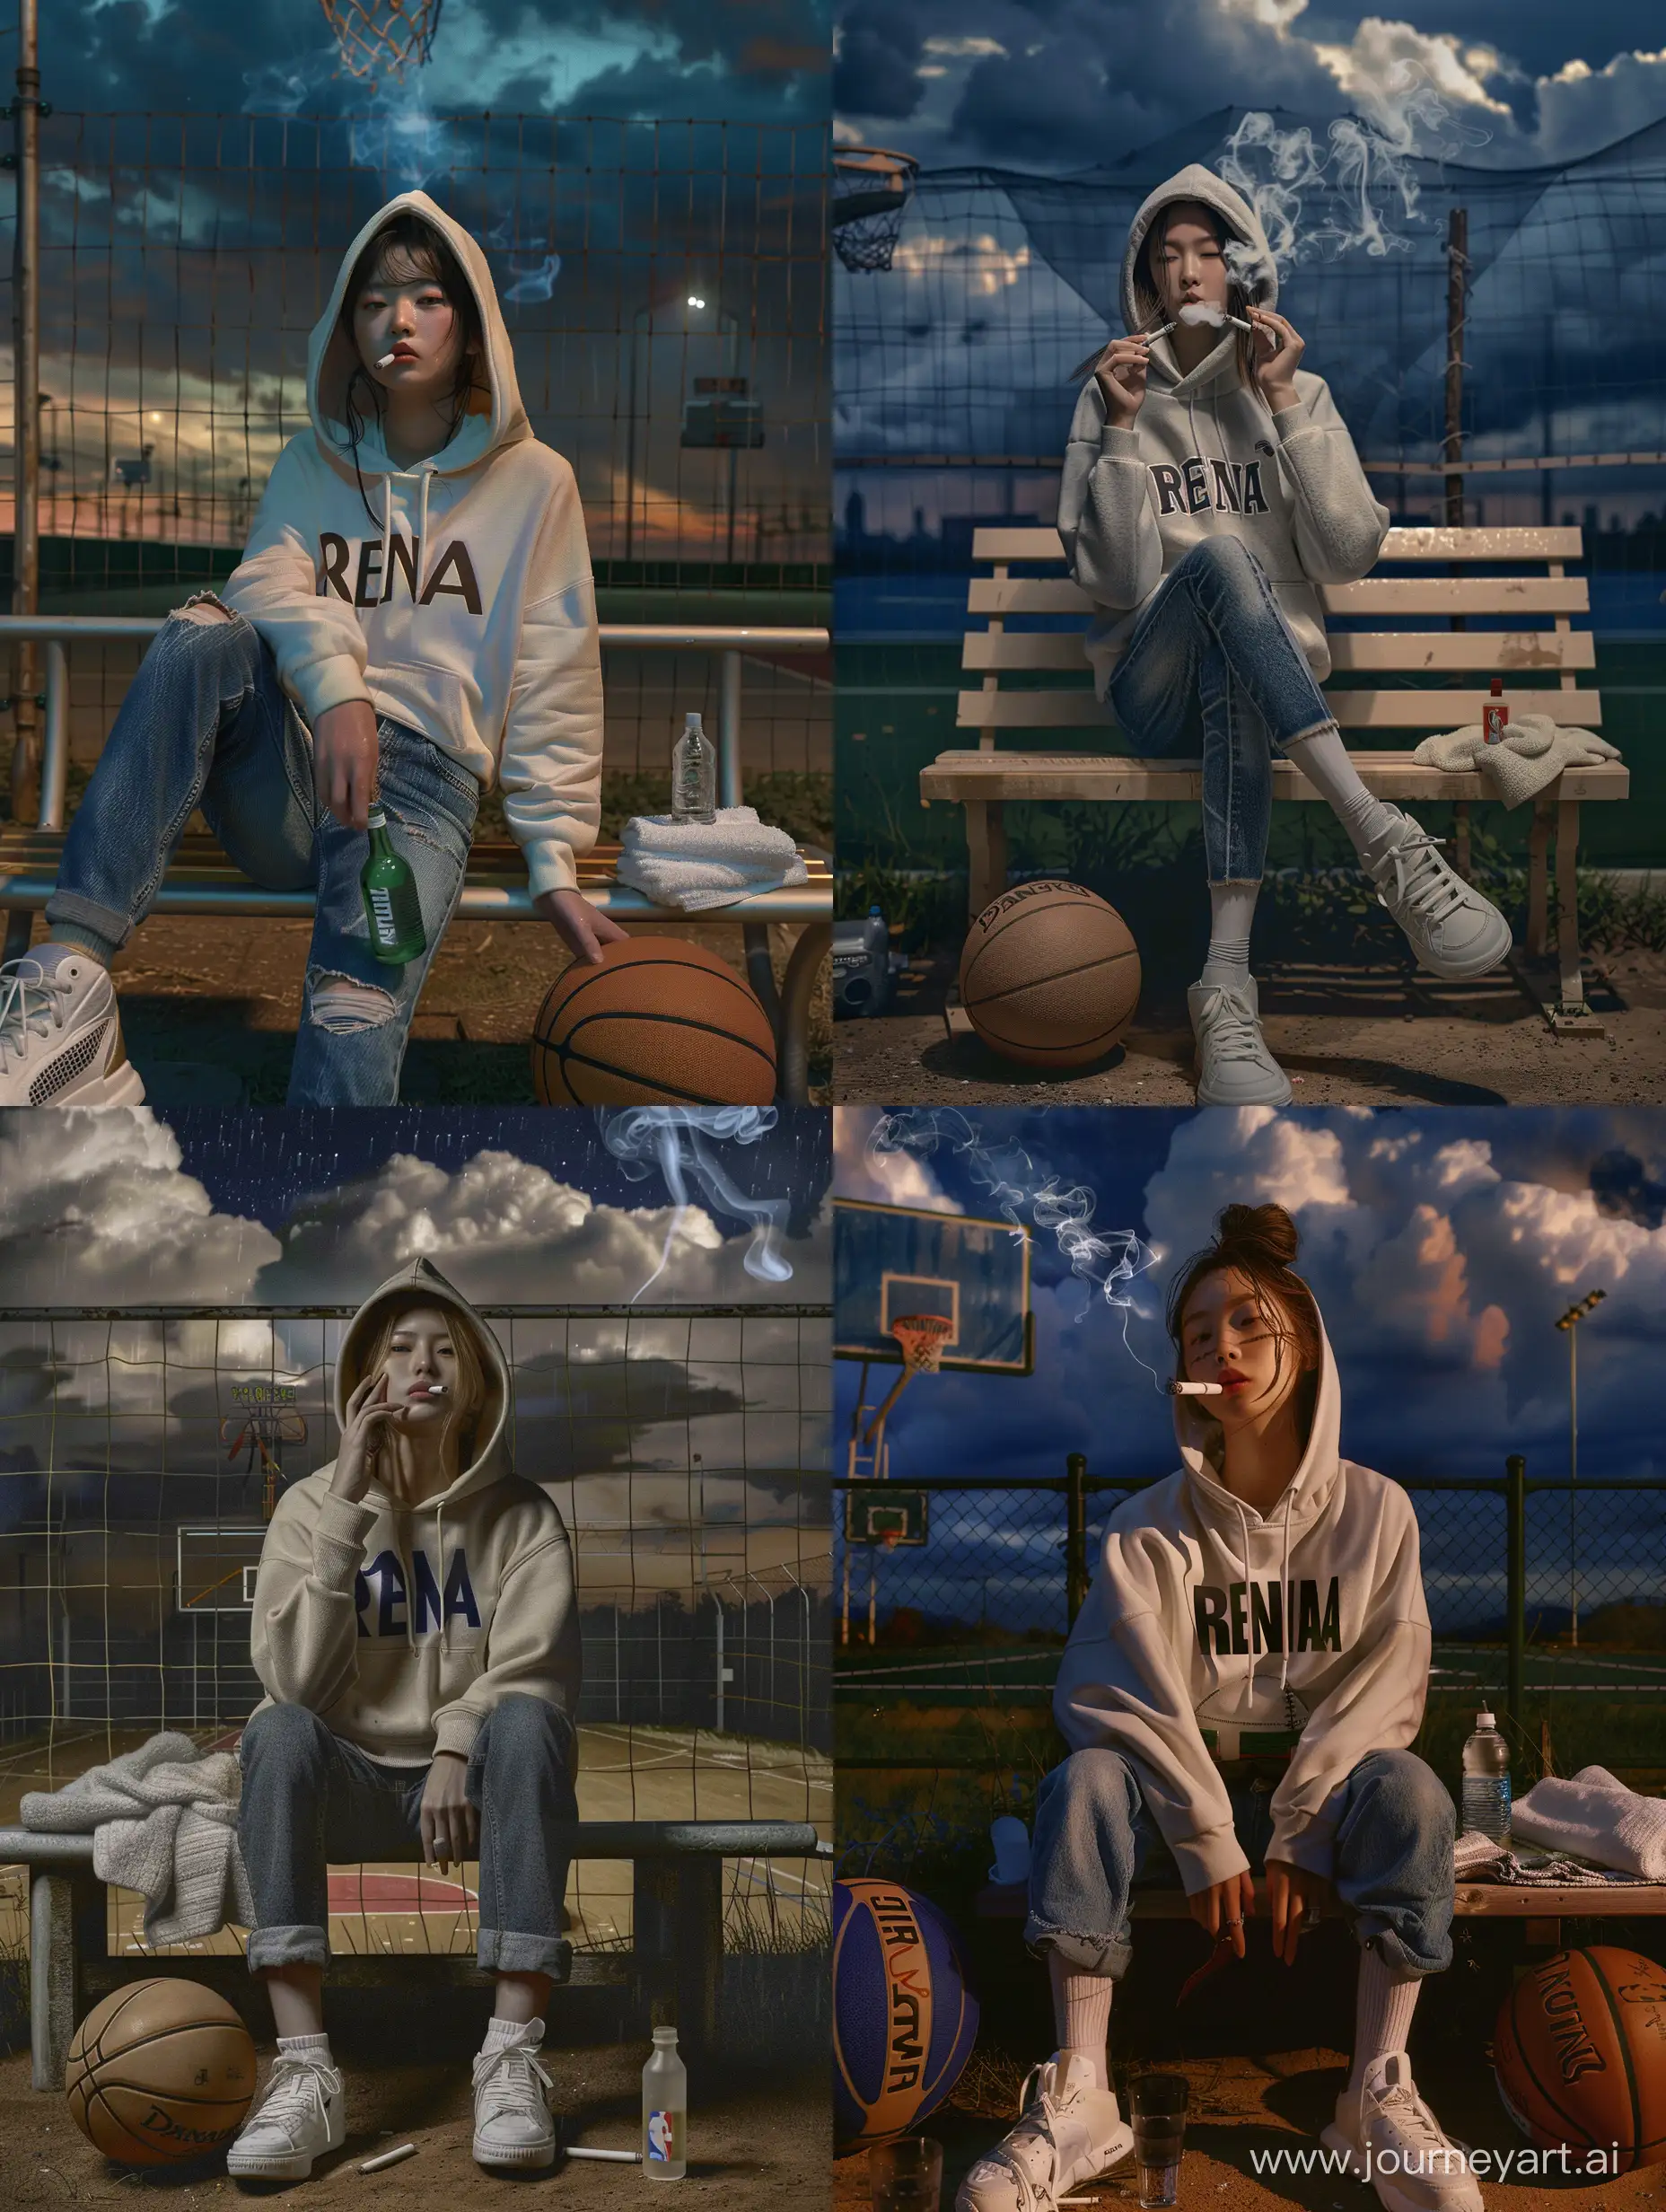 Beautiful Korean woman with tied hair wearing a hoodie that says "RENA", jeans and white shoes, face must look real and detailed, sitting on a bench in front of the field fence, while smoking, basketball court background, basketball, small towel, drinking bottle, ultra HD, cloudy night, real photo, high detail, ultra sharp, 18mm lens, realistic, photography, Leica camera